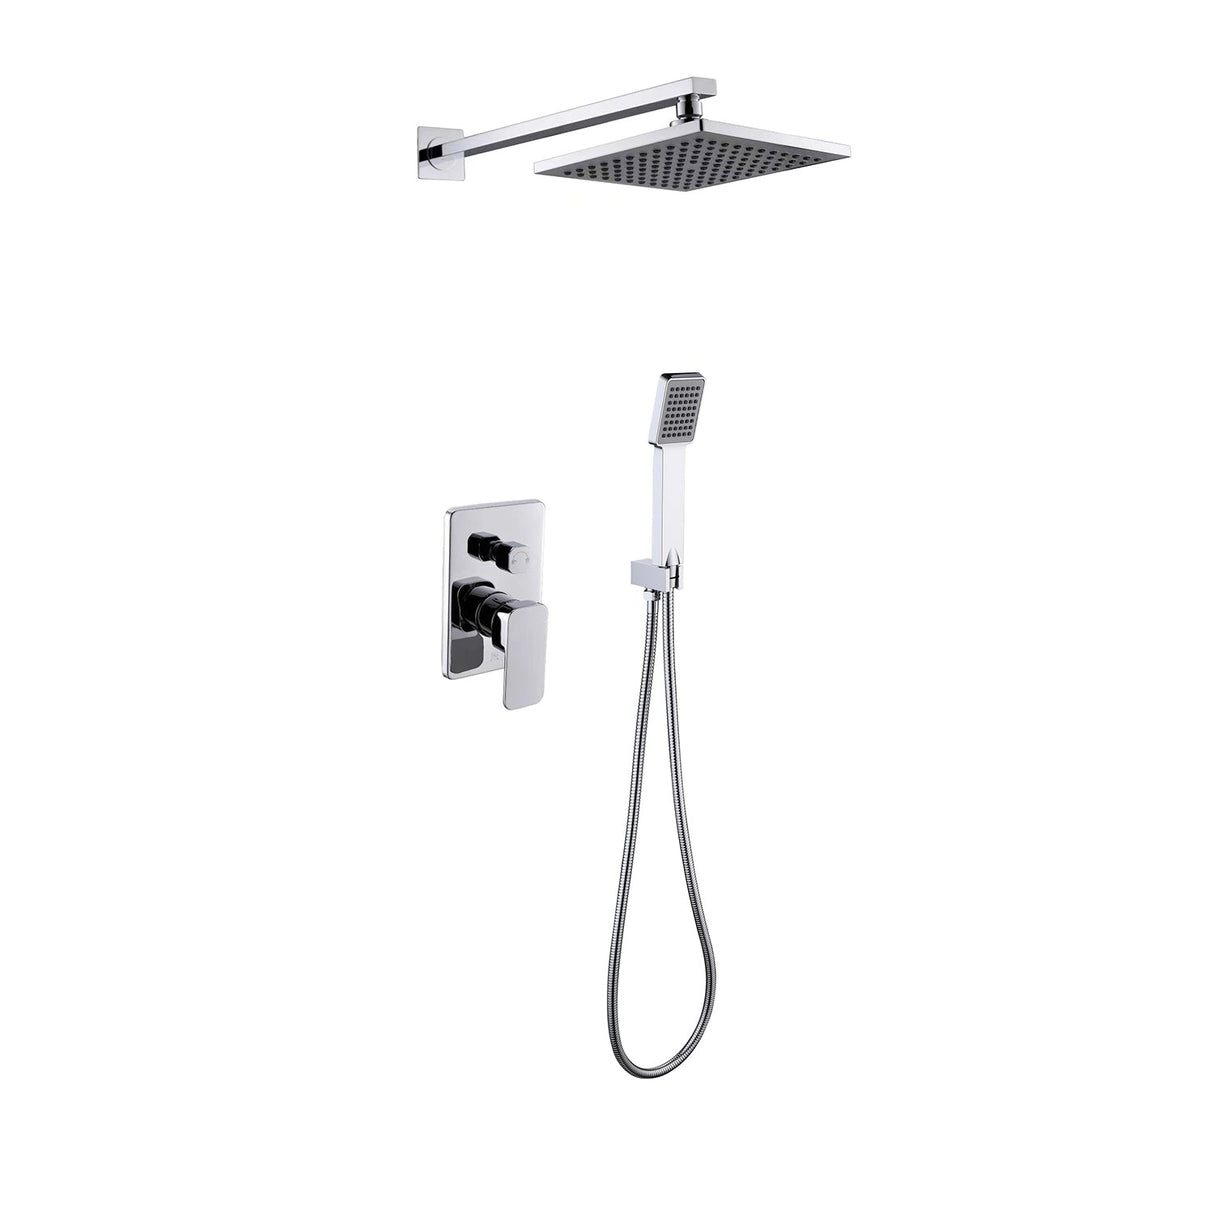 DAX Brass Square Shower System with Hand Shower, Brushed Nickel DAX-6813B-BN